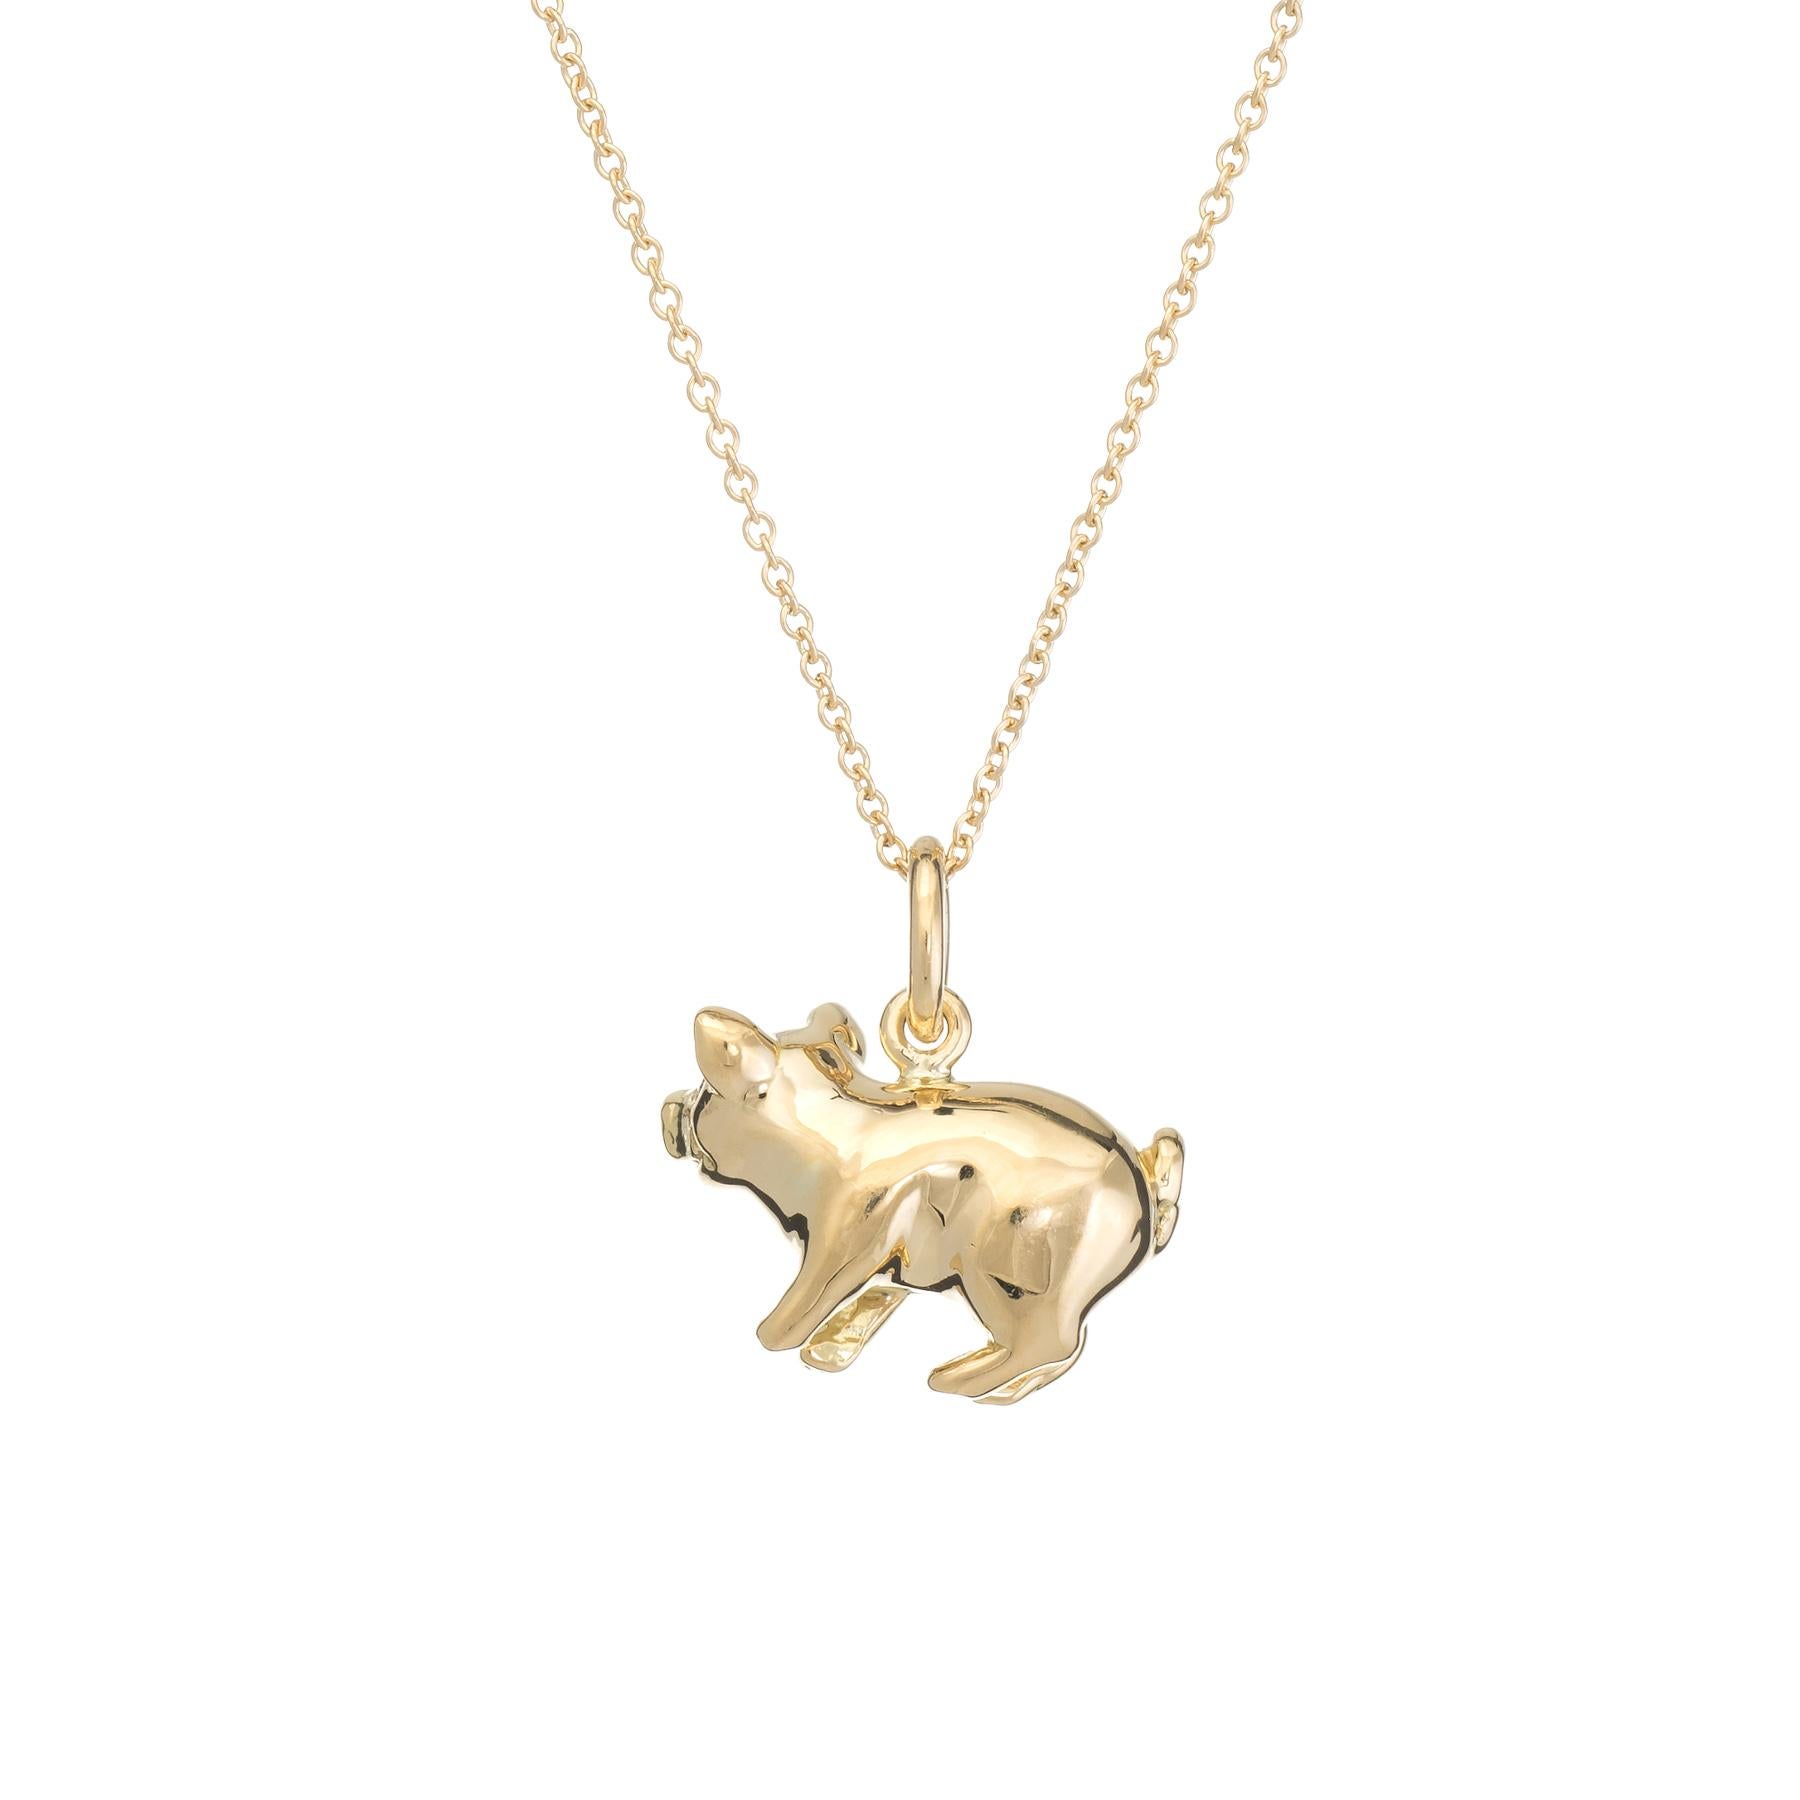 Finely detailed Tiffany & Co pig charm, crafted in 18 karat yellow gold.  

Two diamonds are embedded into the eyes and total an estimated 0.02 carats (estimated at F-G color and VVS2 clarity). 

Tiffany & Co necklace included (measures 16